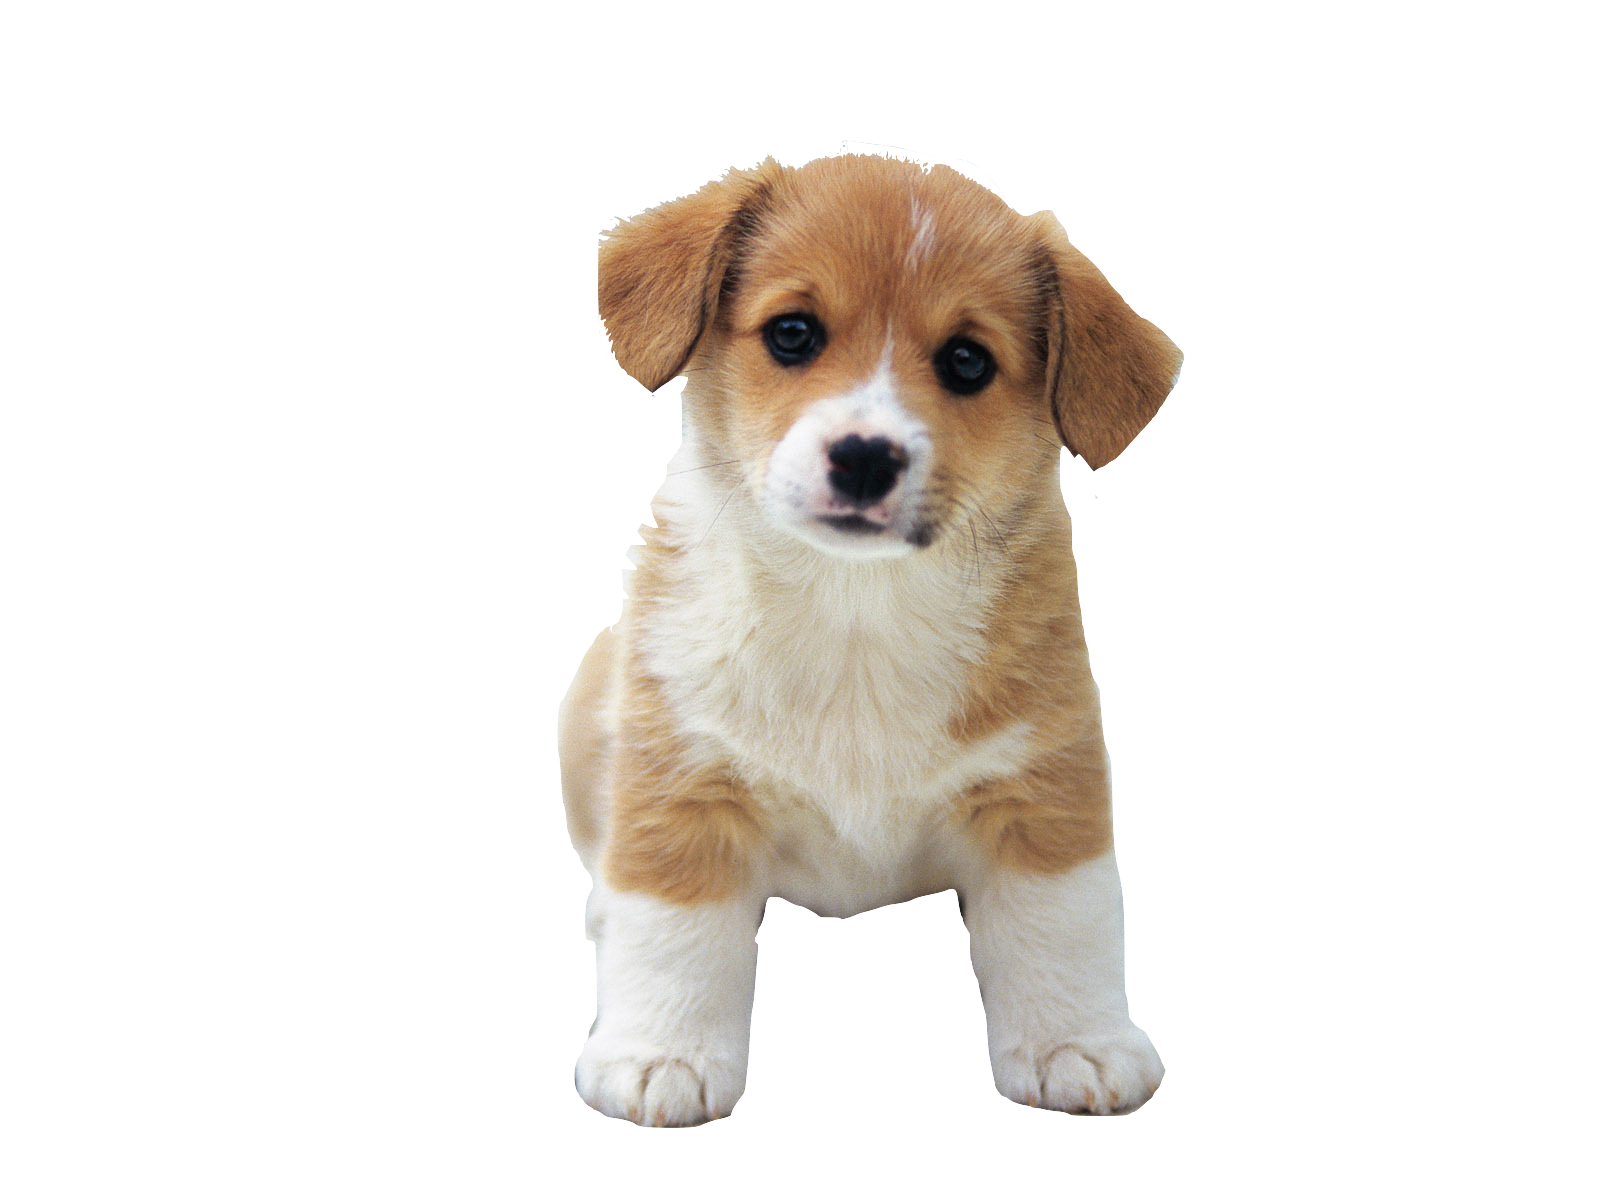 PNG HD Of Puppies - 138266